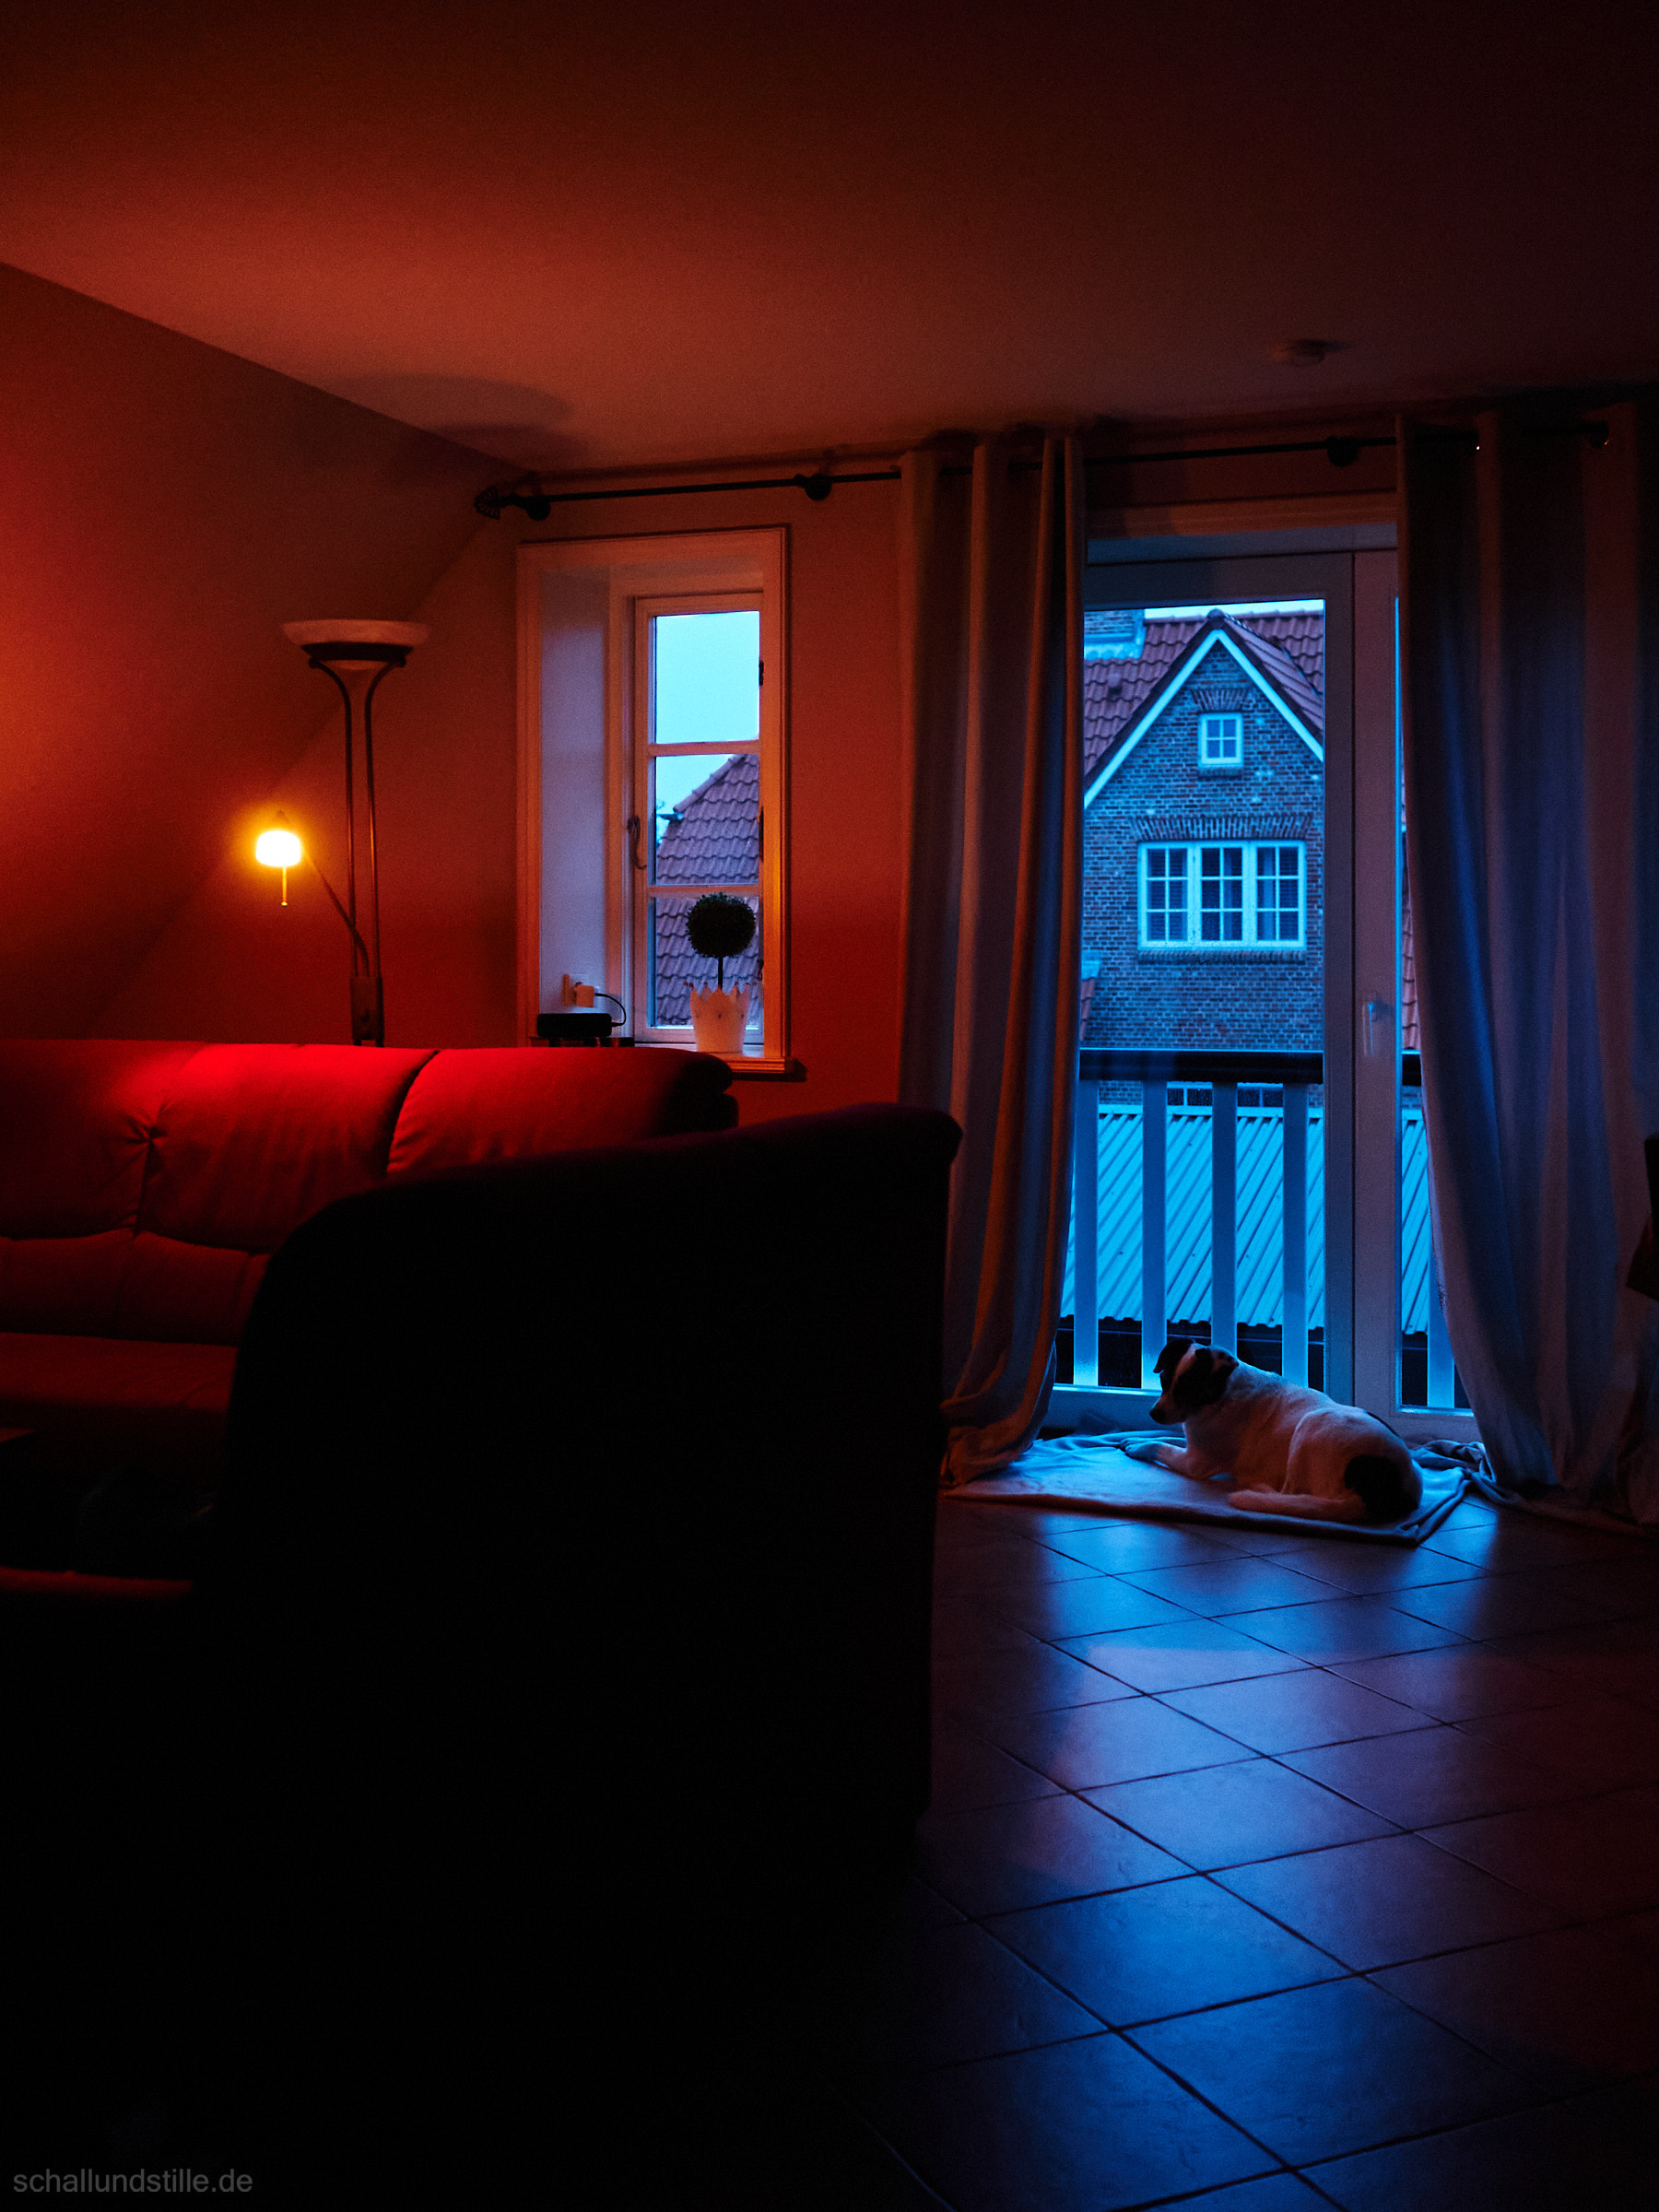 a dog resting at a window at the break of dawn. a single lightbulb is illuminating the room. the dawn casts a blue light into the room, the lightbulb shines red.